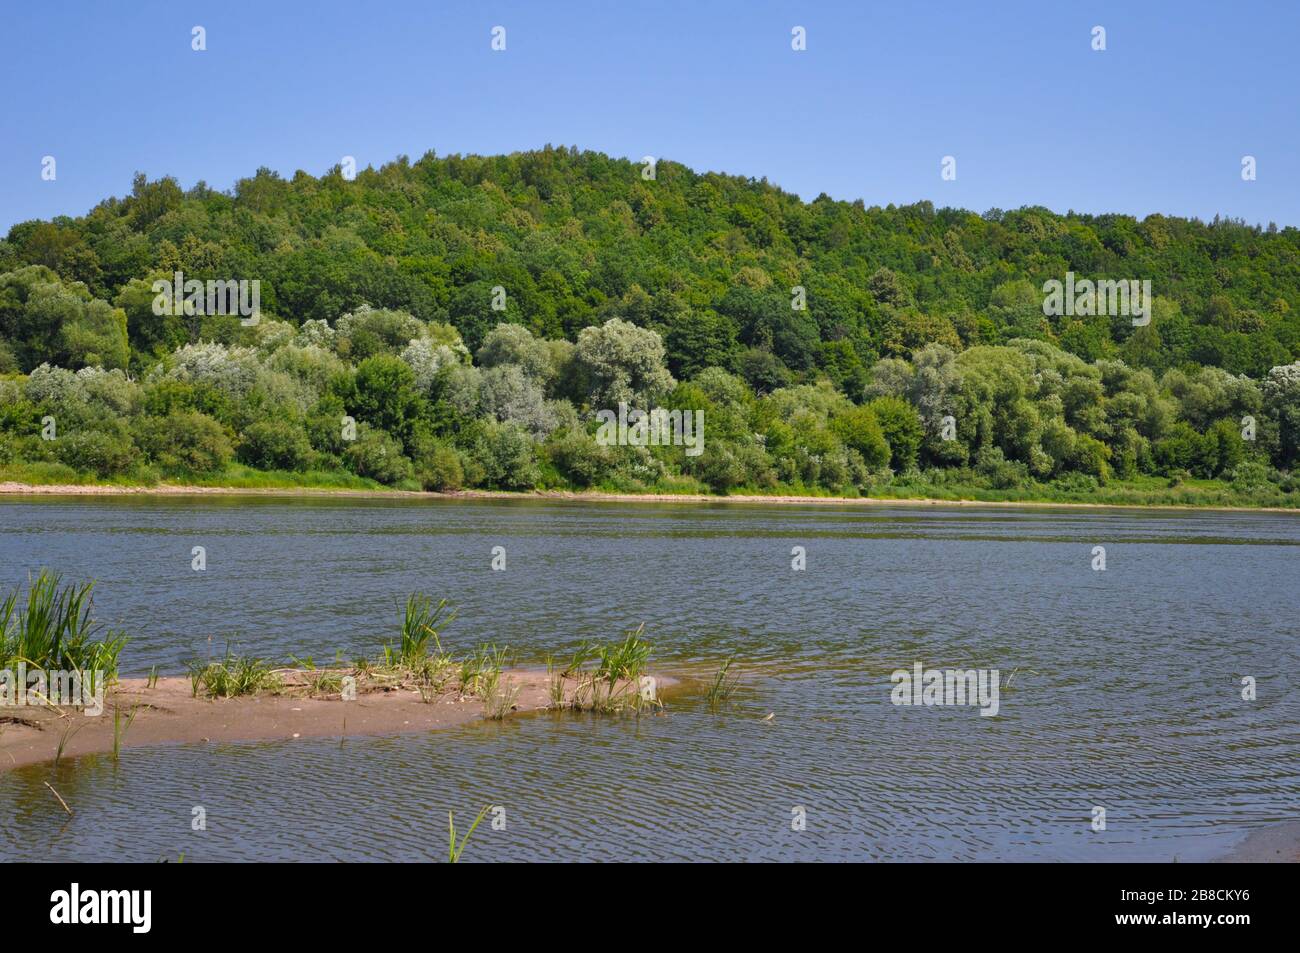 Riverscape on a summer day with Oka river, forest growing on a river bank and blue sky. Stock Photo